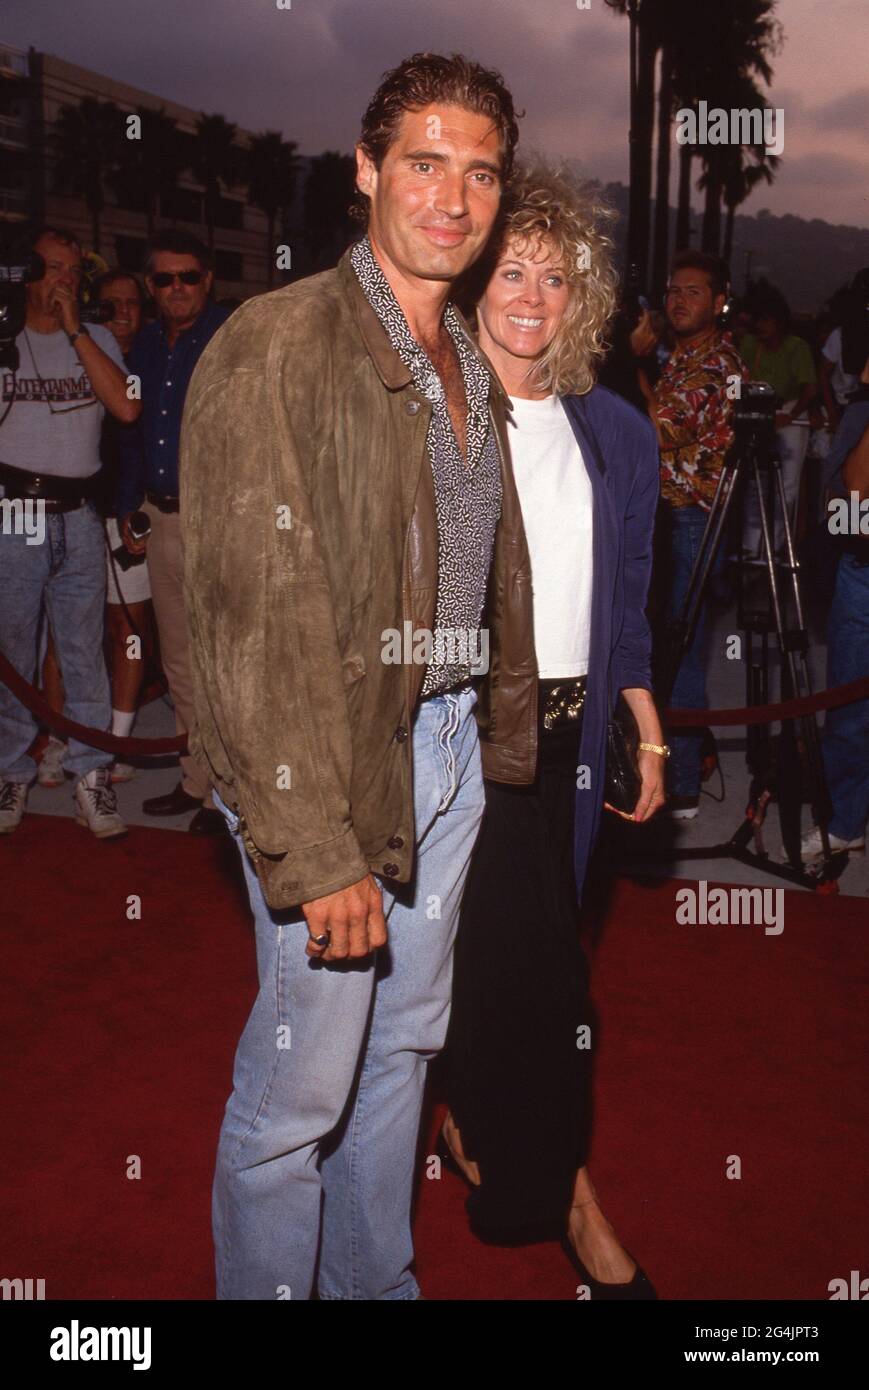 bekymre jeg er tørstig Væk NIVERSAL CITY, CA - AUGUST 13: Actor Michael Nouri and wife Vicki Light  attending the premiere of "Wild At Heart" on August 13, 1990 at the  Cinerama Dome Theater in Universal City,